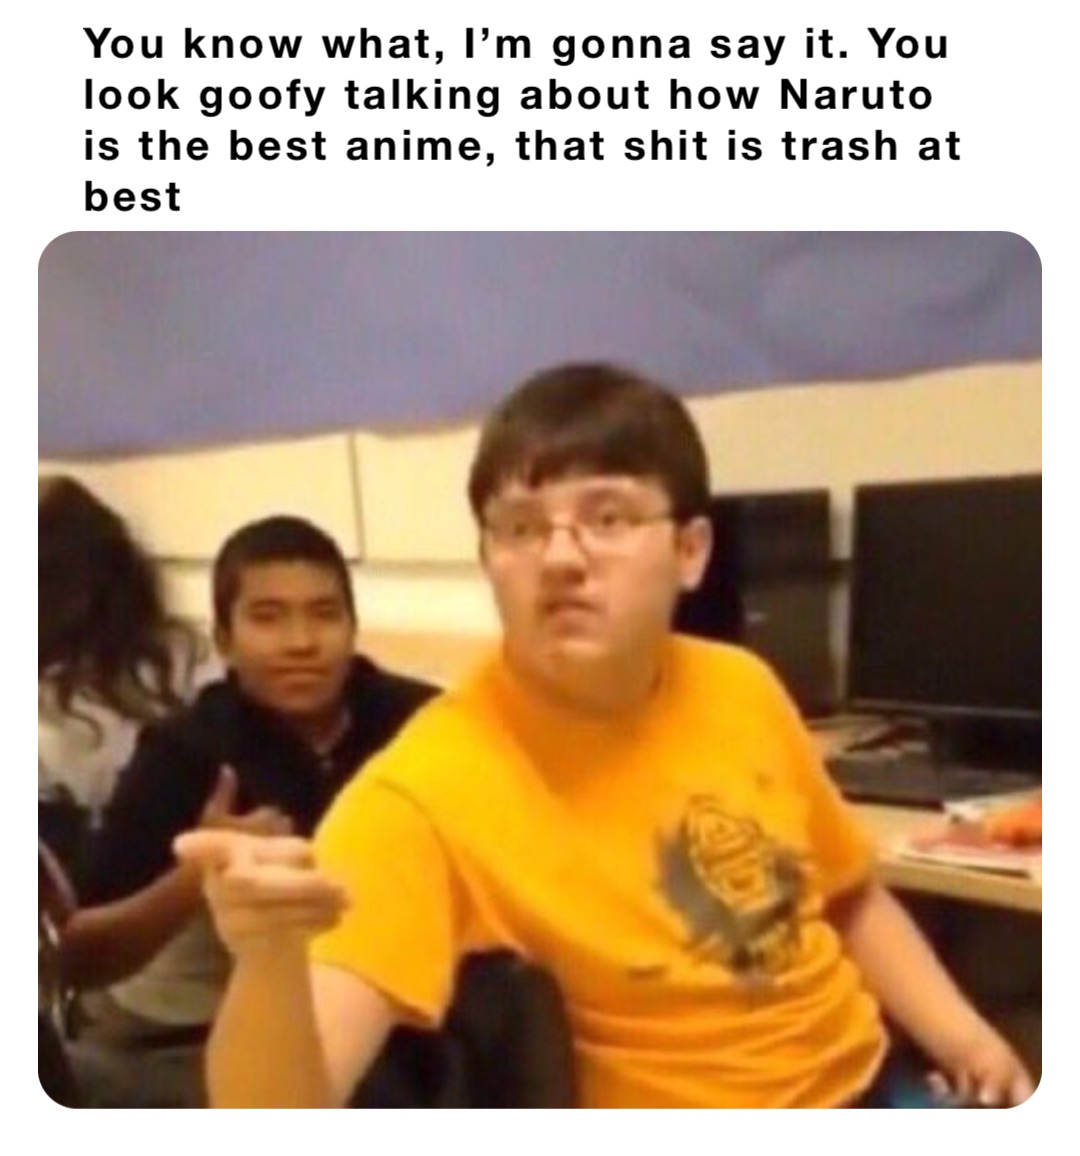 You know what, I’m gonna say it. You look goofy talking about how Naruto is the best anime, that shit is trash at best